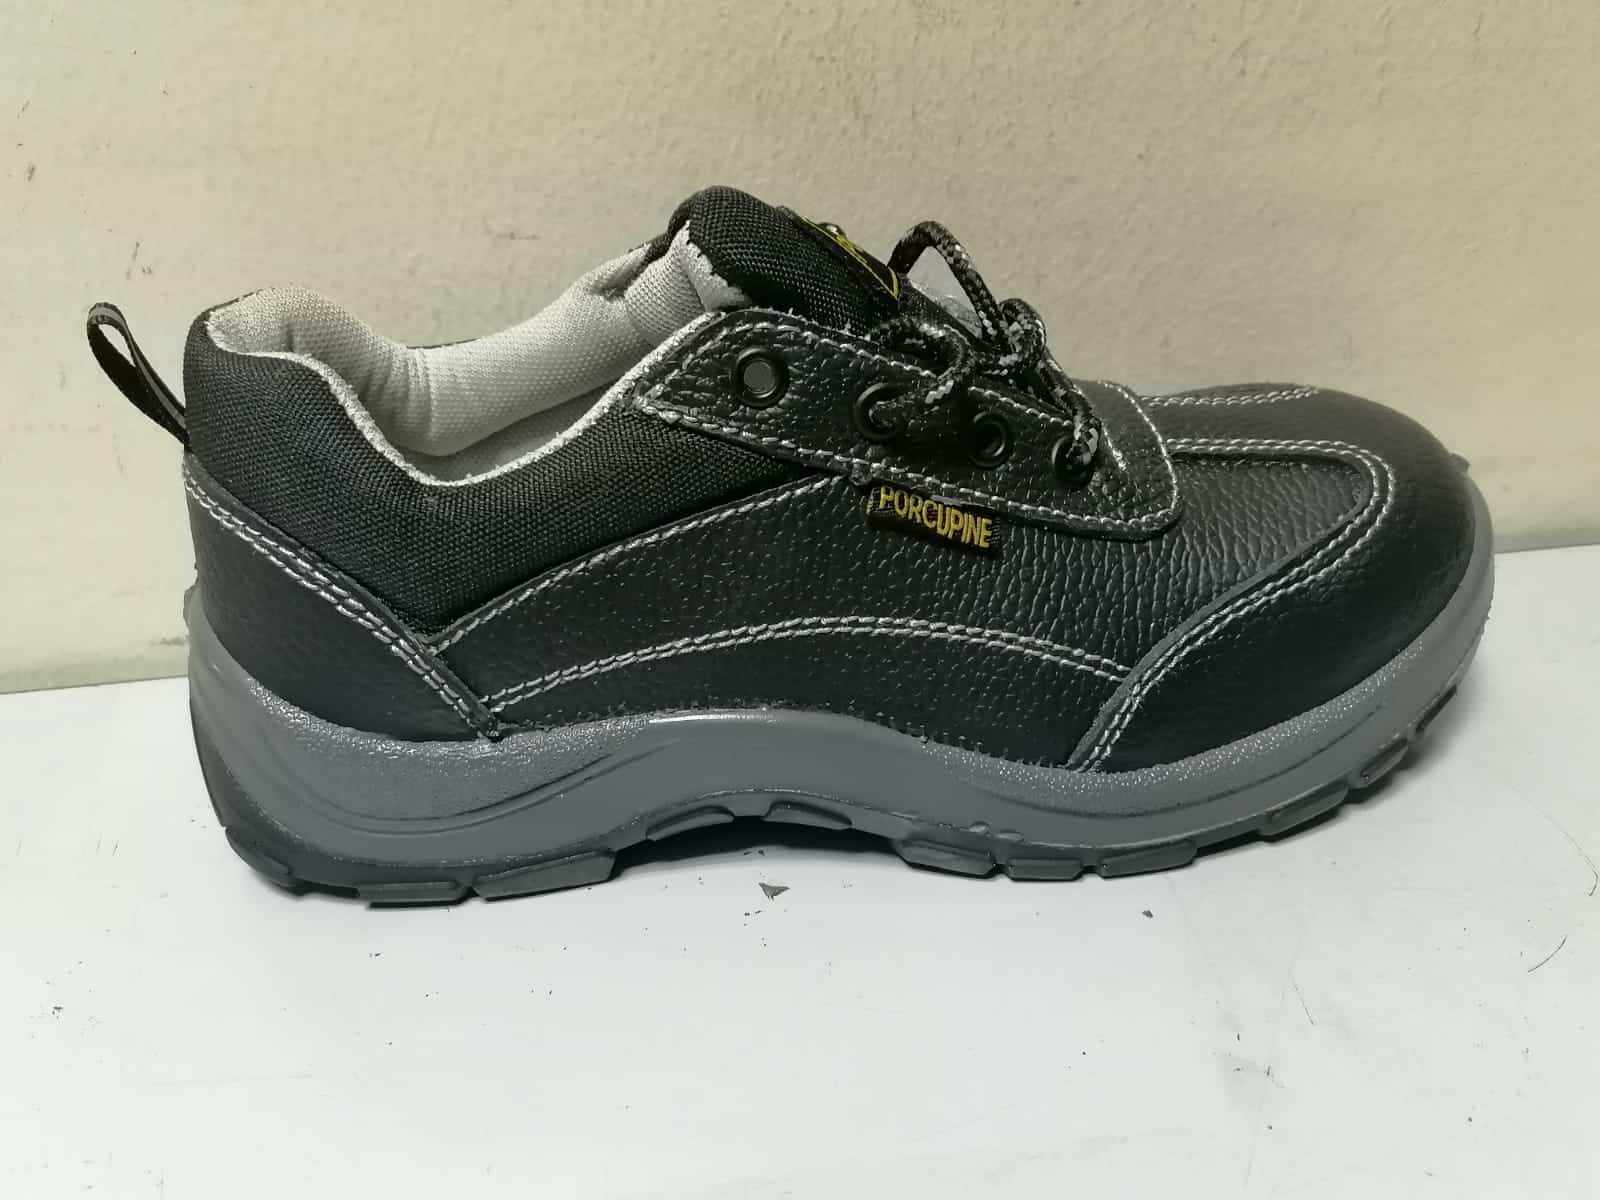 Porcupine Ladies Safety Shoes